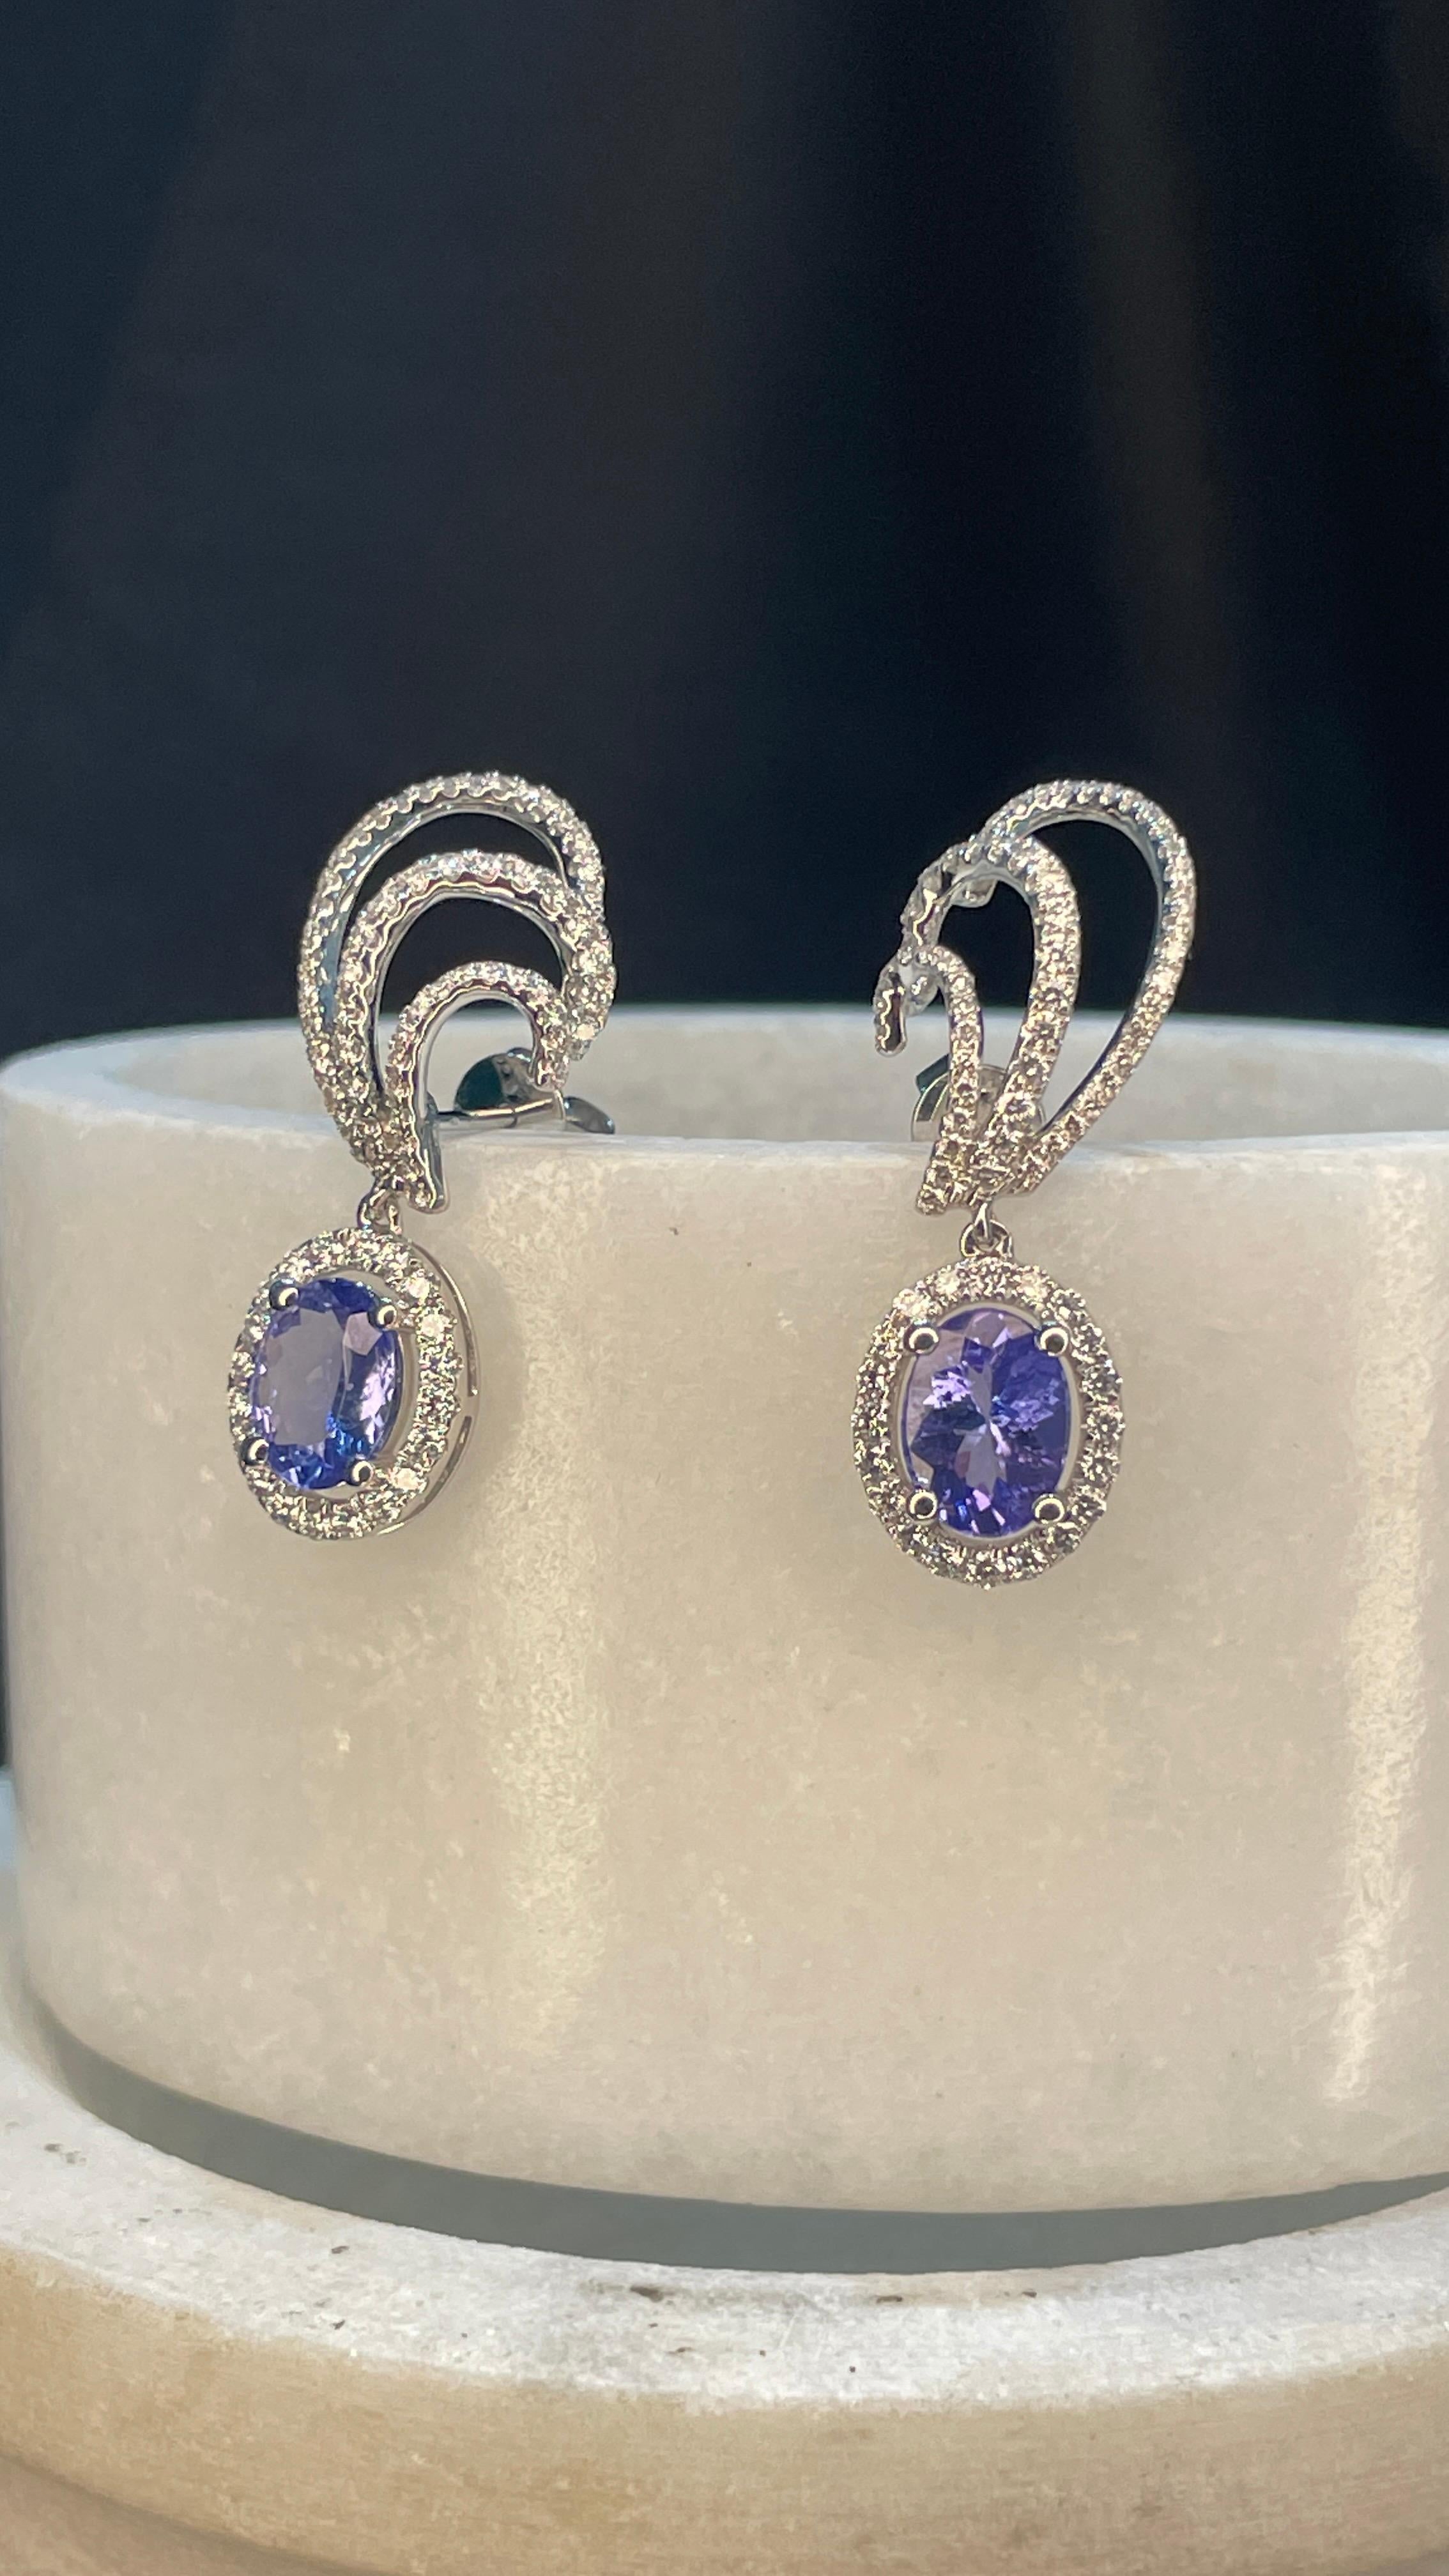 1.98 Carat Tanzanite and Diamond Designer Stud Earrings in 14K White Gold In New Condition For Sale In Houston, TX